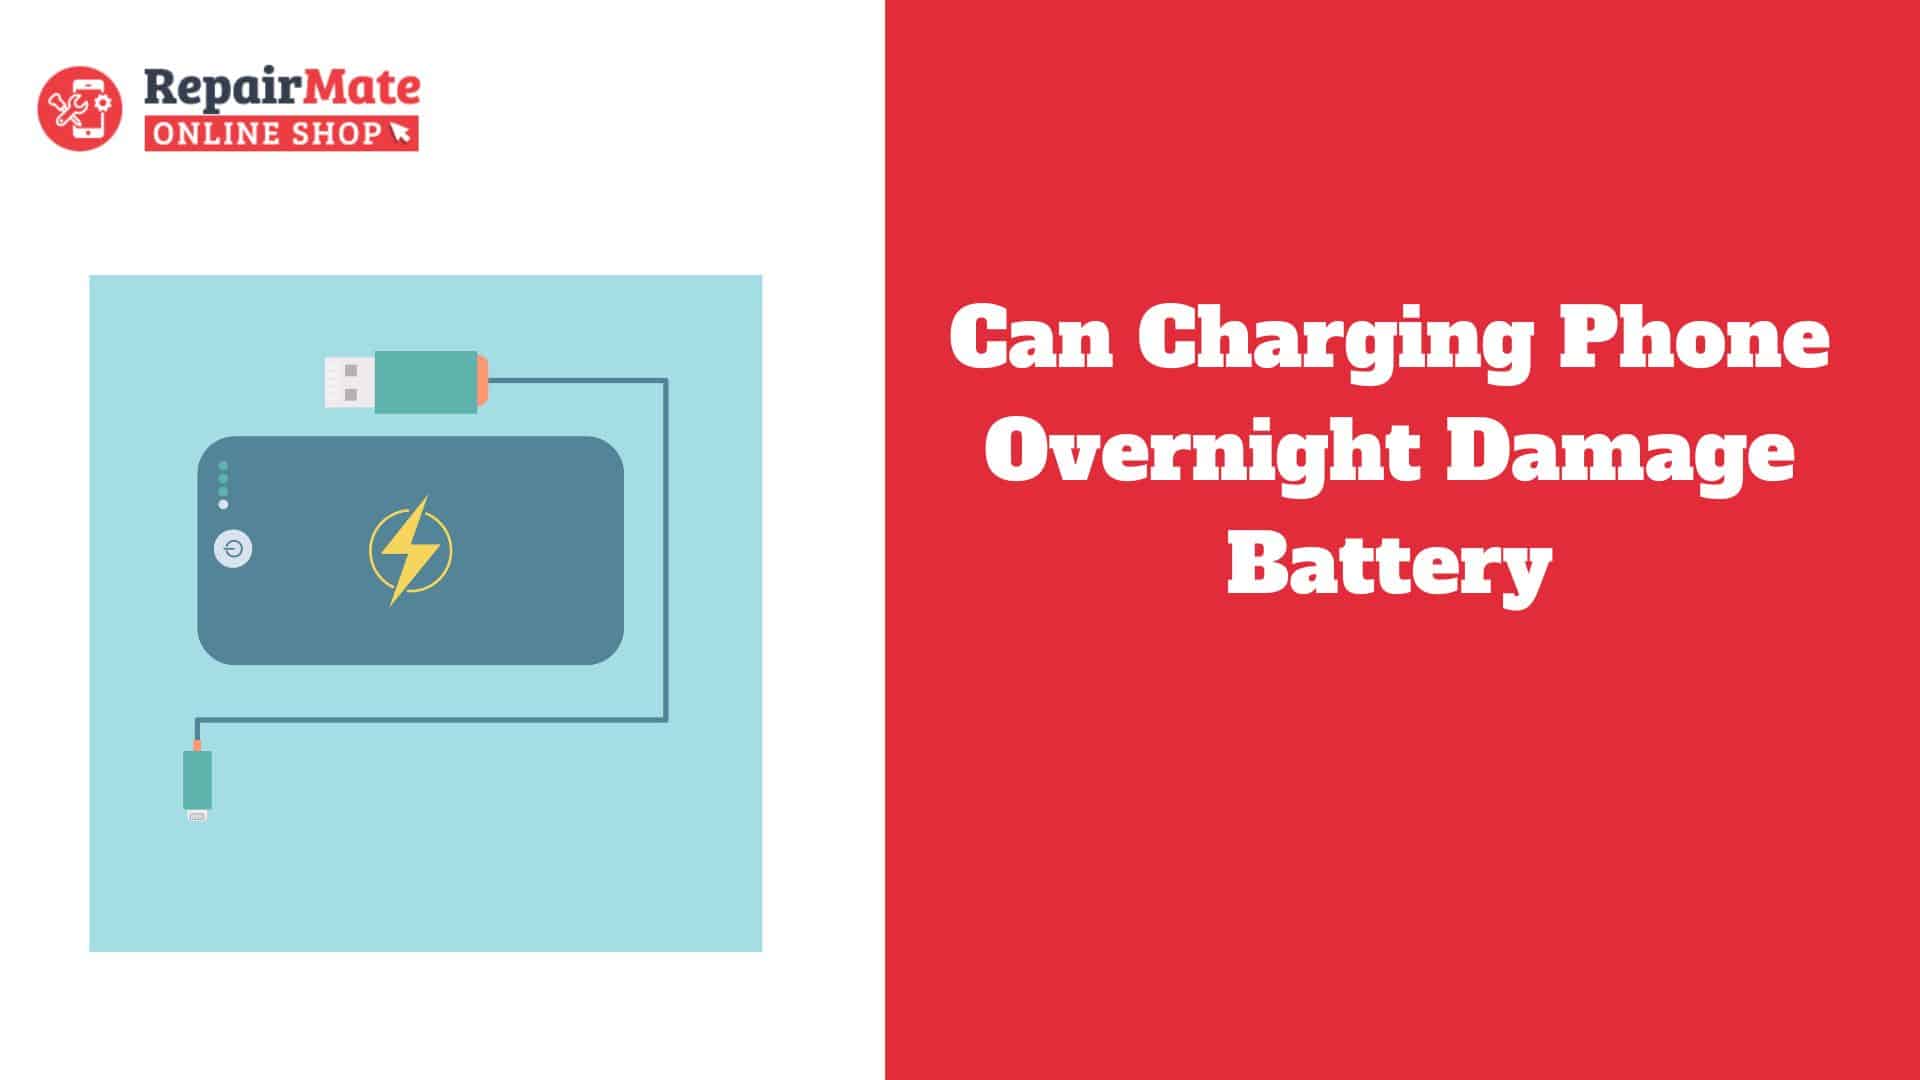 Can Charging Phone Overnight Damage Battery